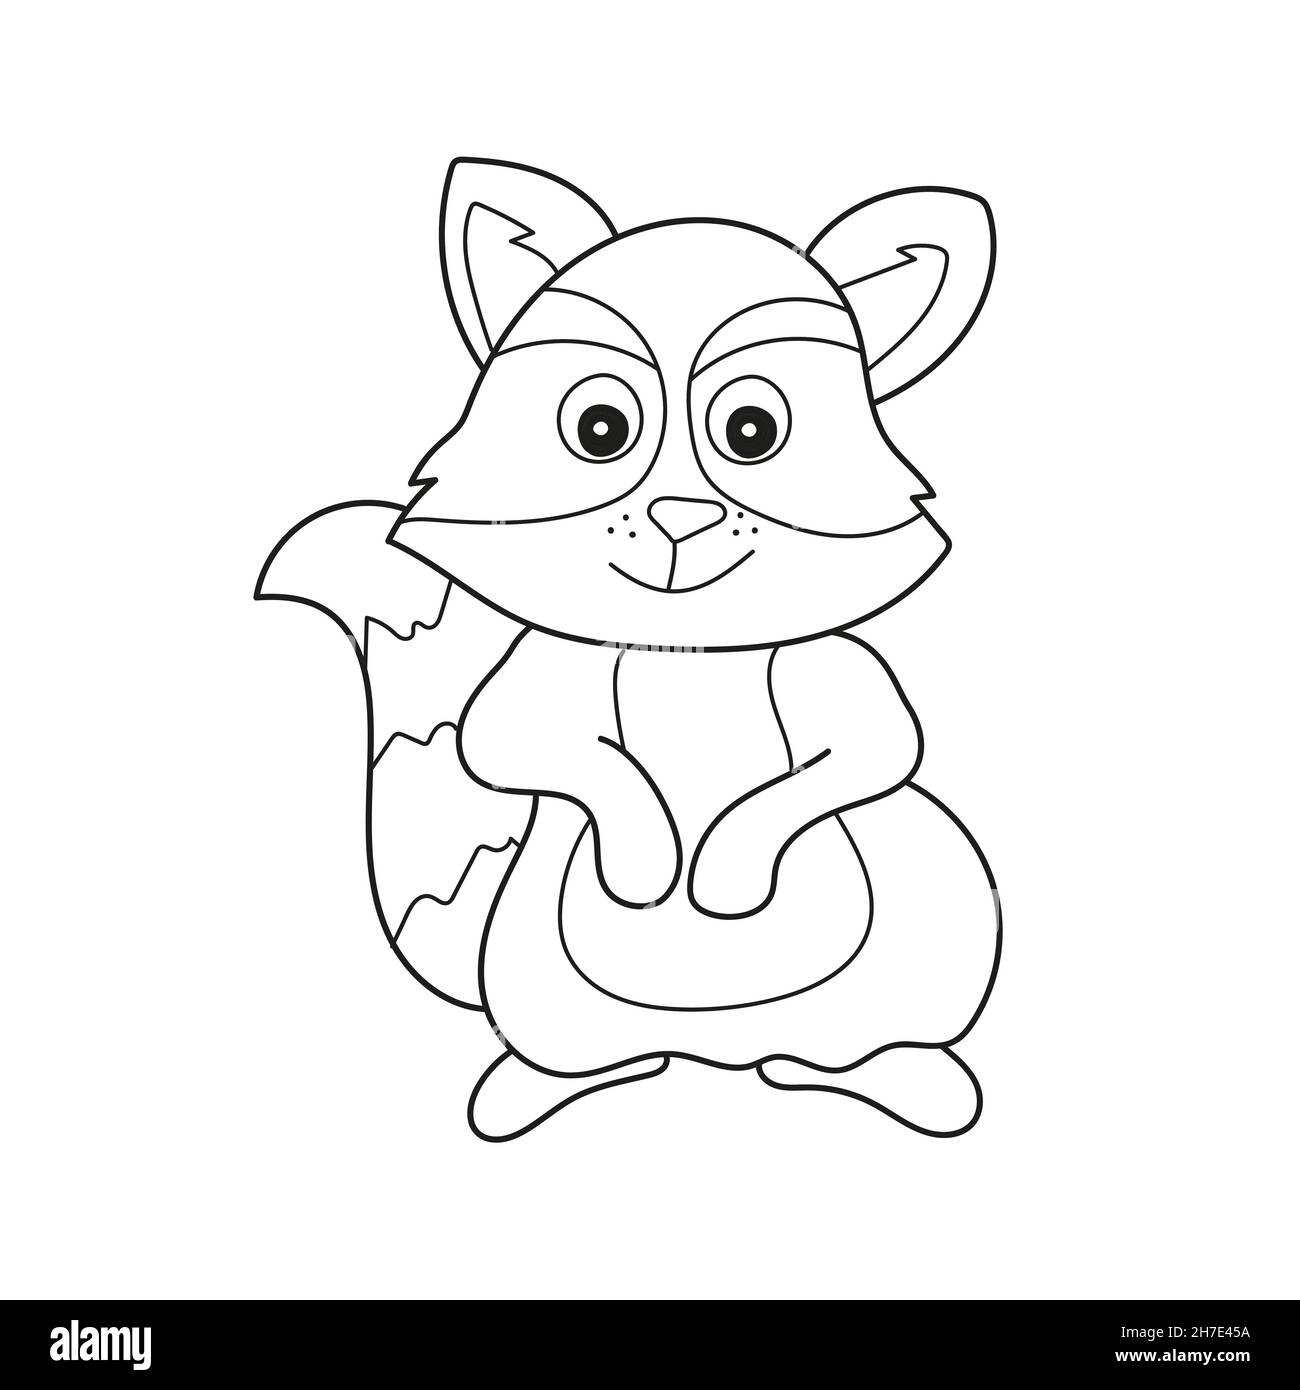 Simple coloring page forest animal raccoon doodle cartoon simple illustration kids drawing style coloring page stock vector image art